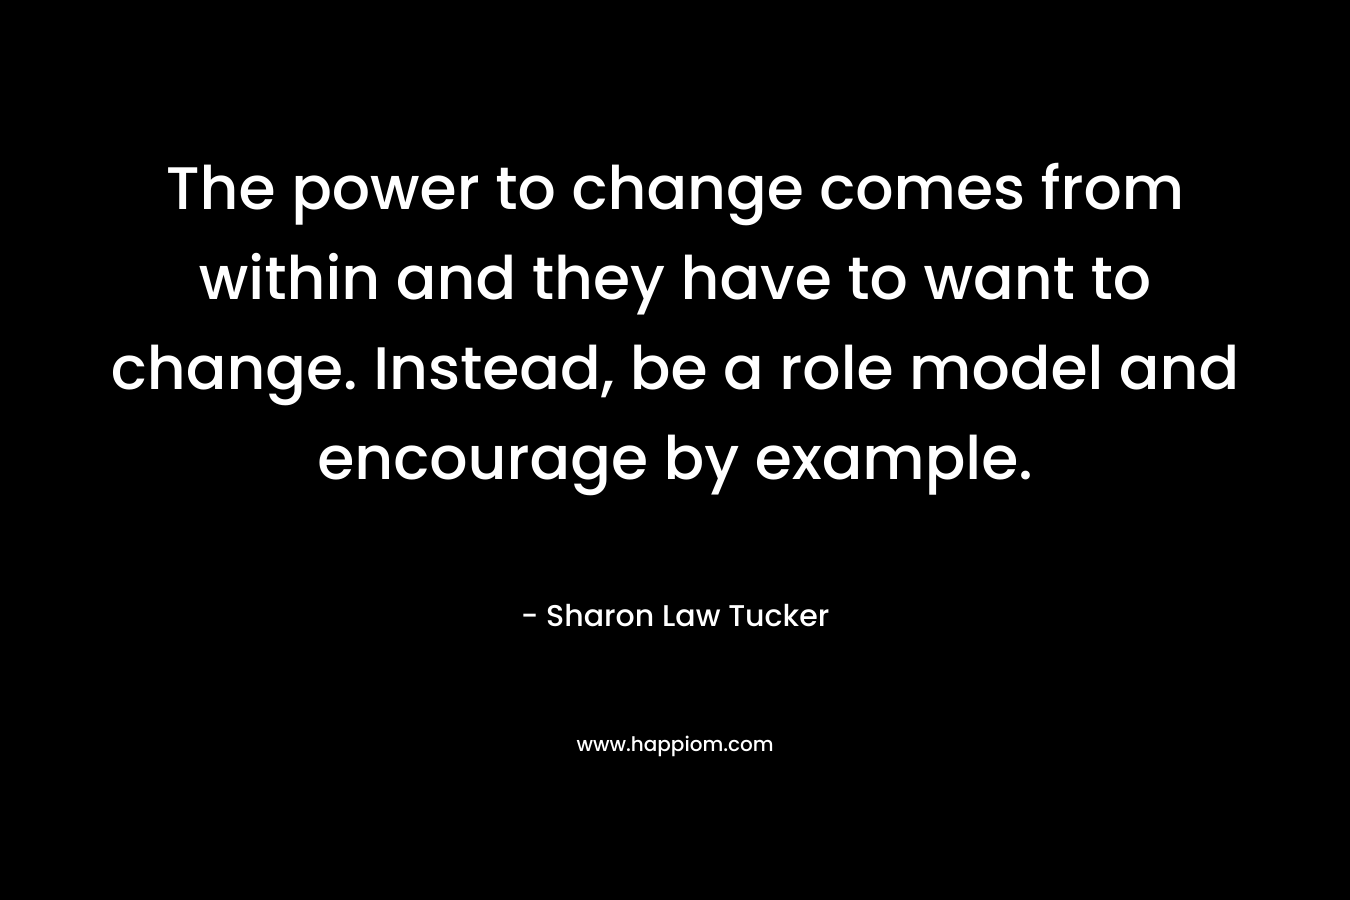 The power to change comes from within and they have to want to change. Instead, be a role model and encourage by example. – Sharon Law Tucker